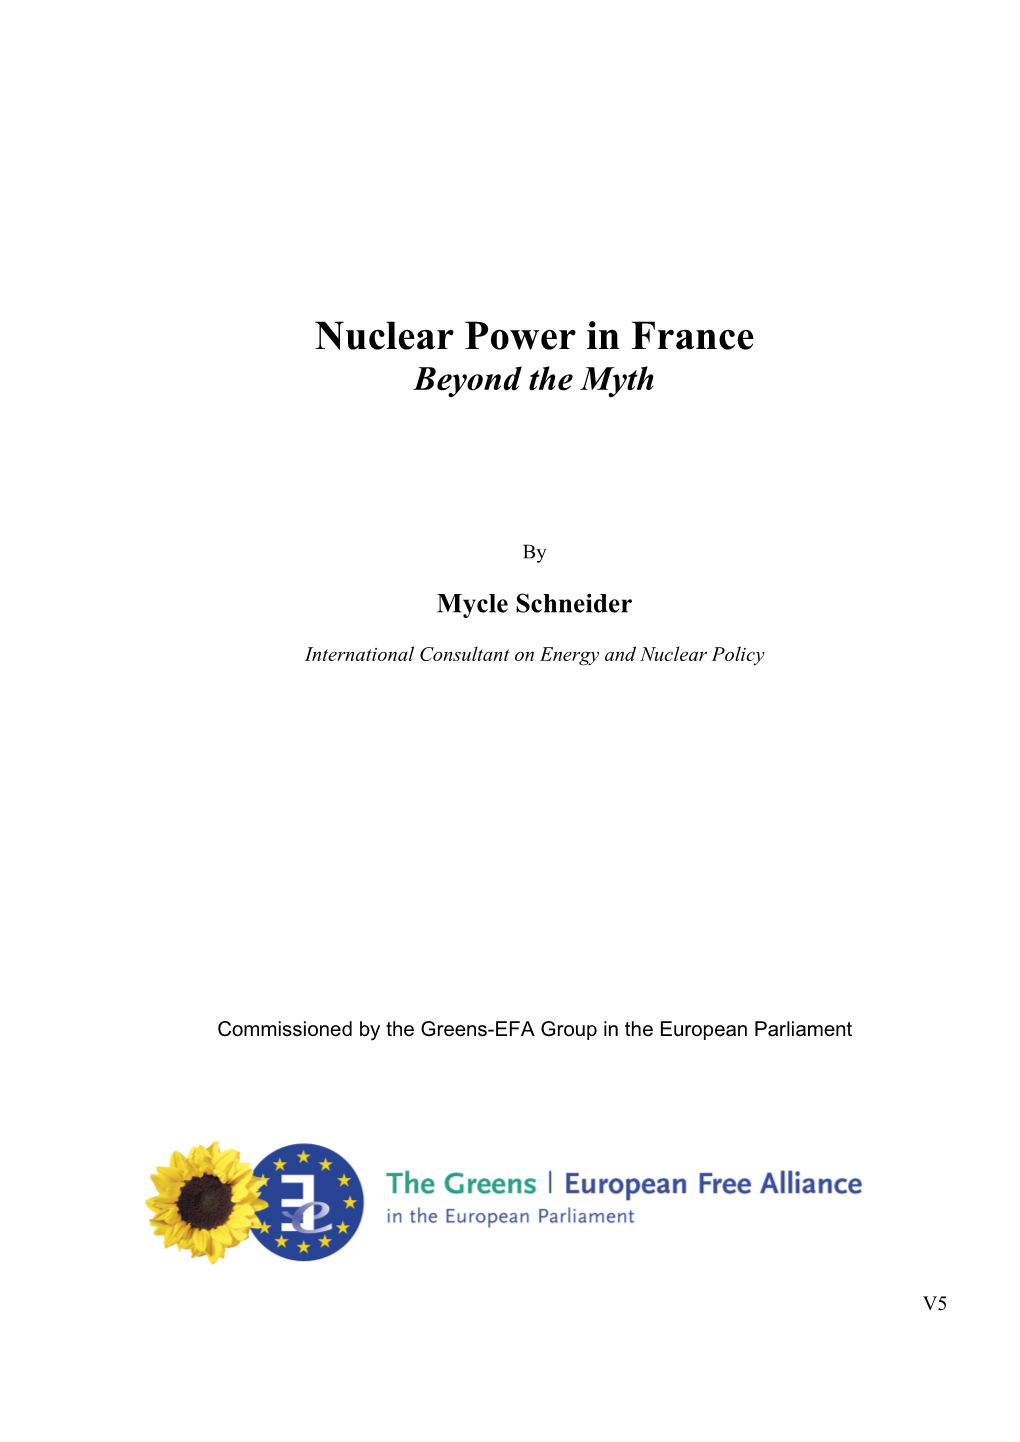 Nuclear Power in France Beyond the Myth